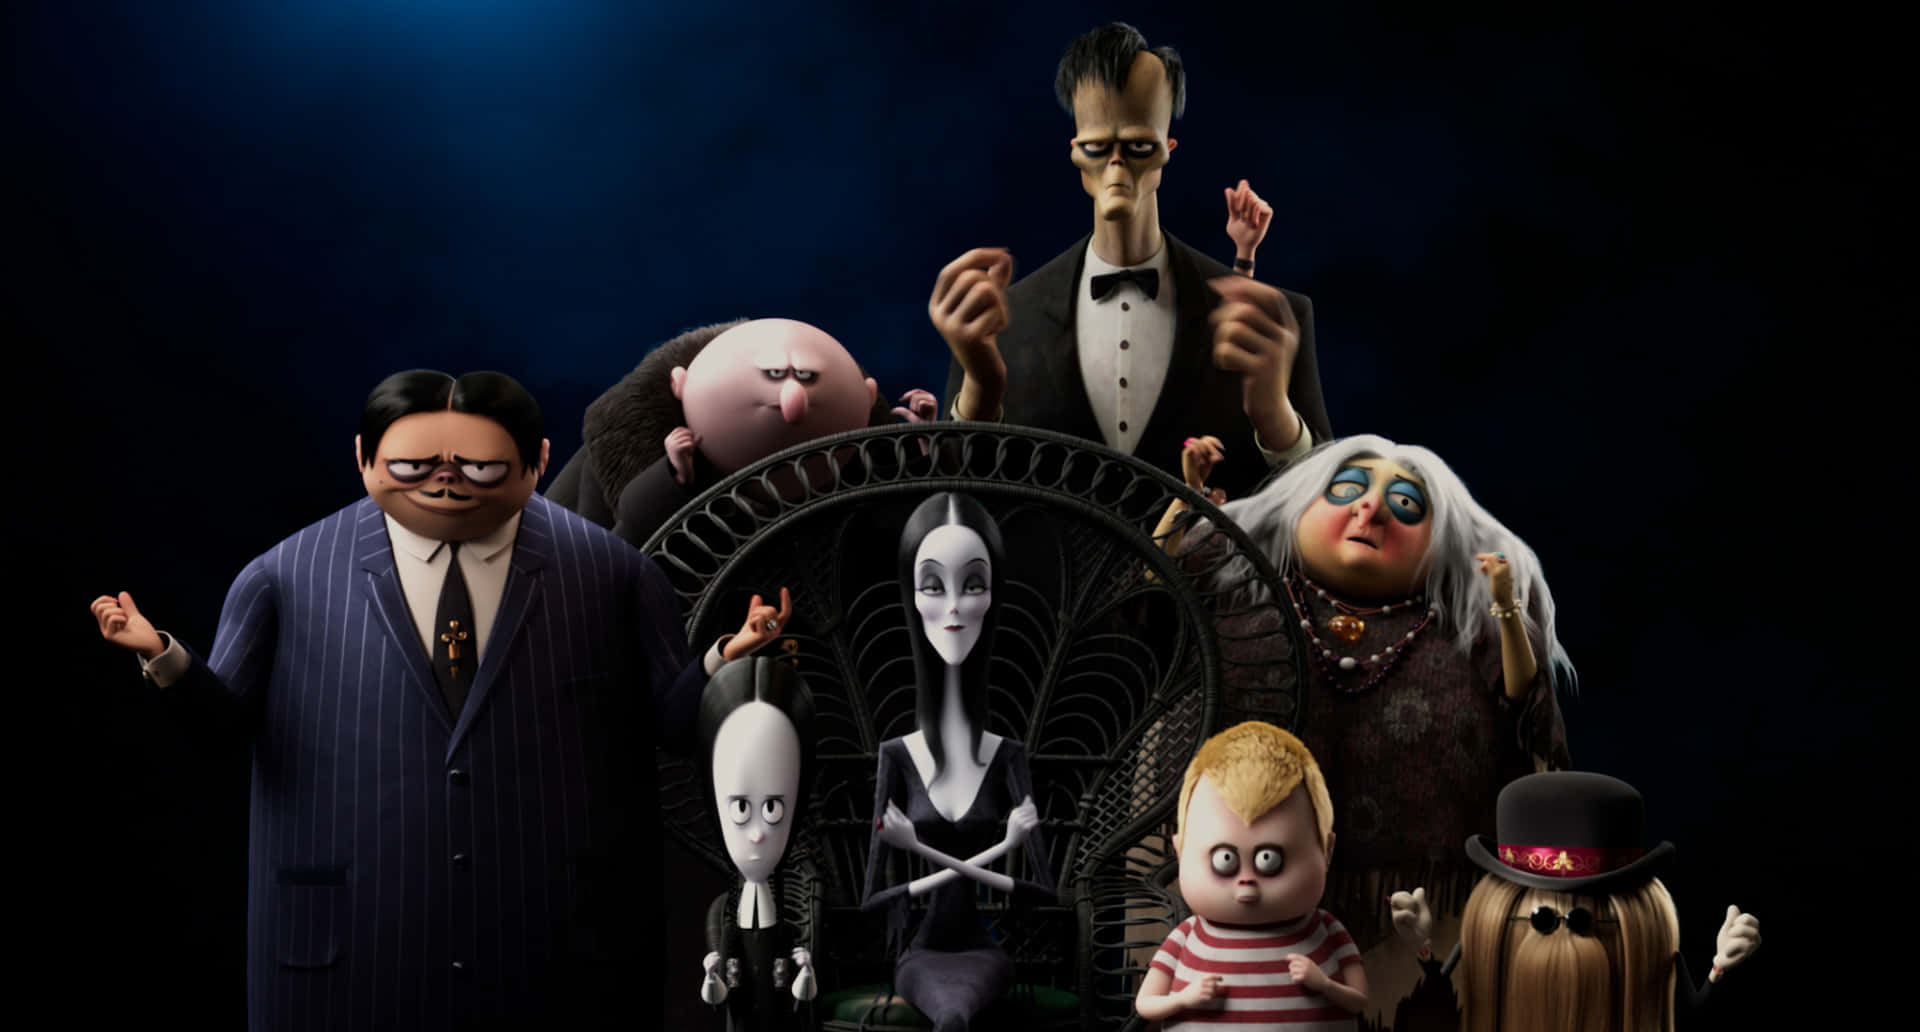 The Addams Family, always up for a spooky adventure!